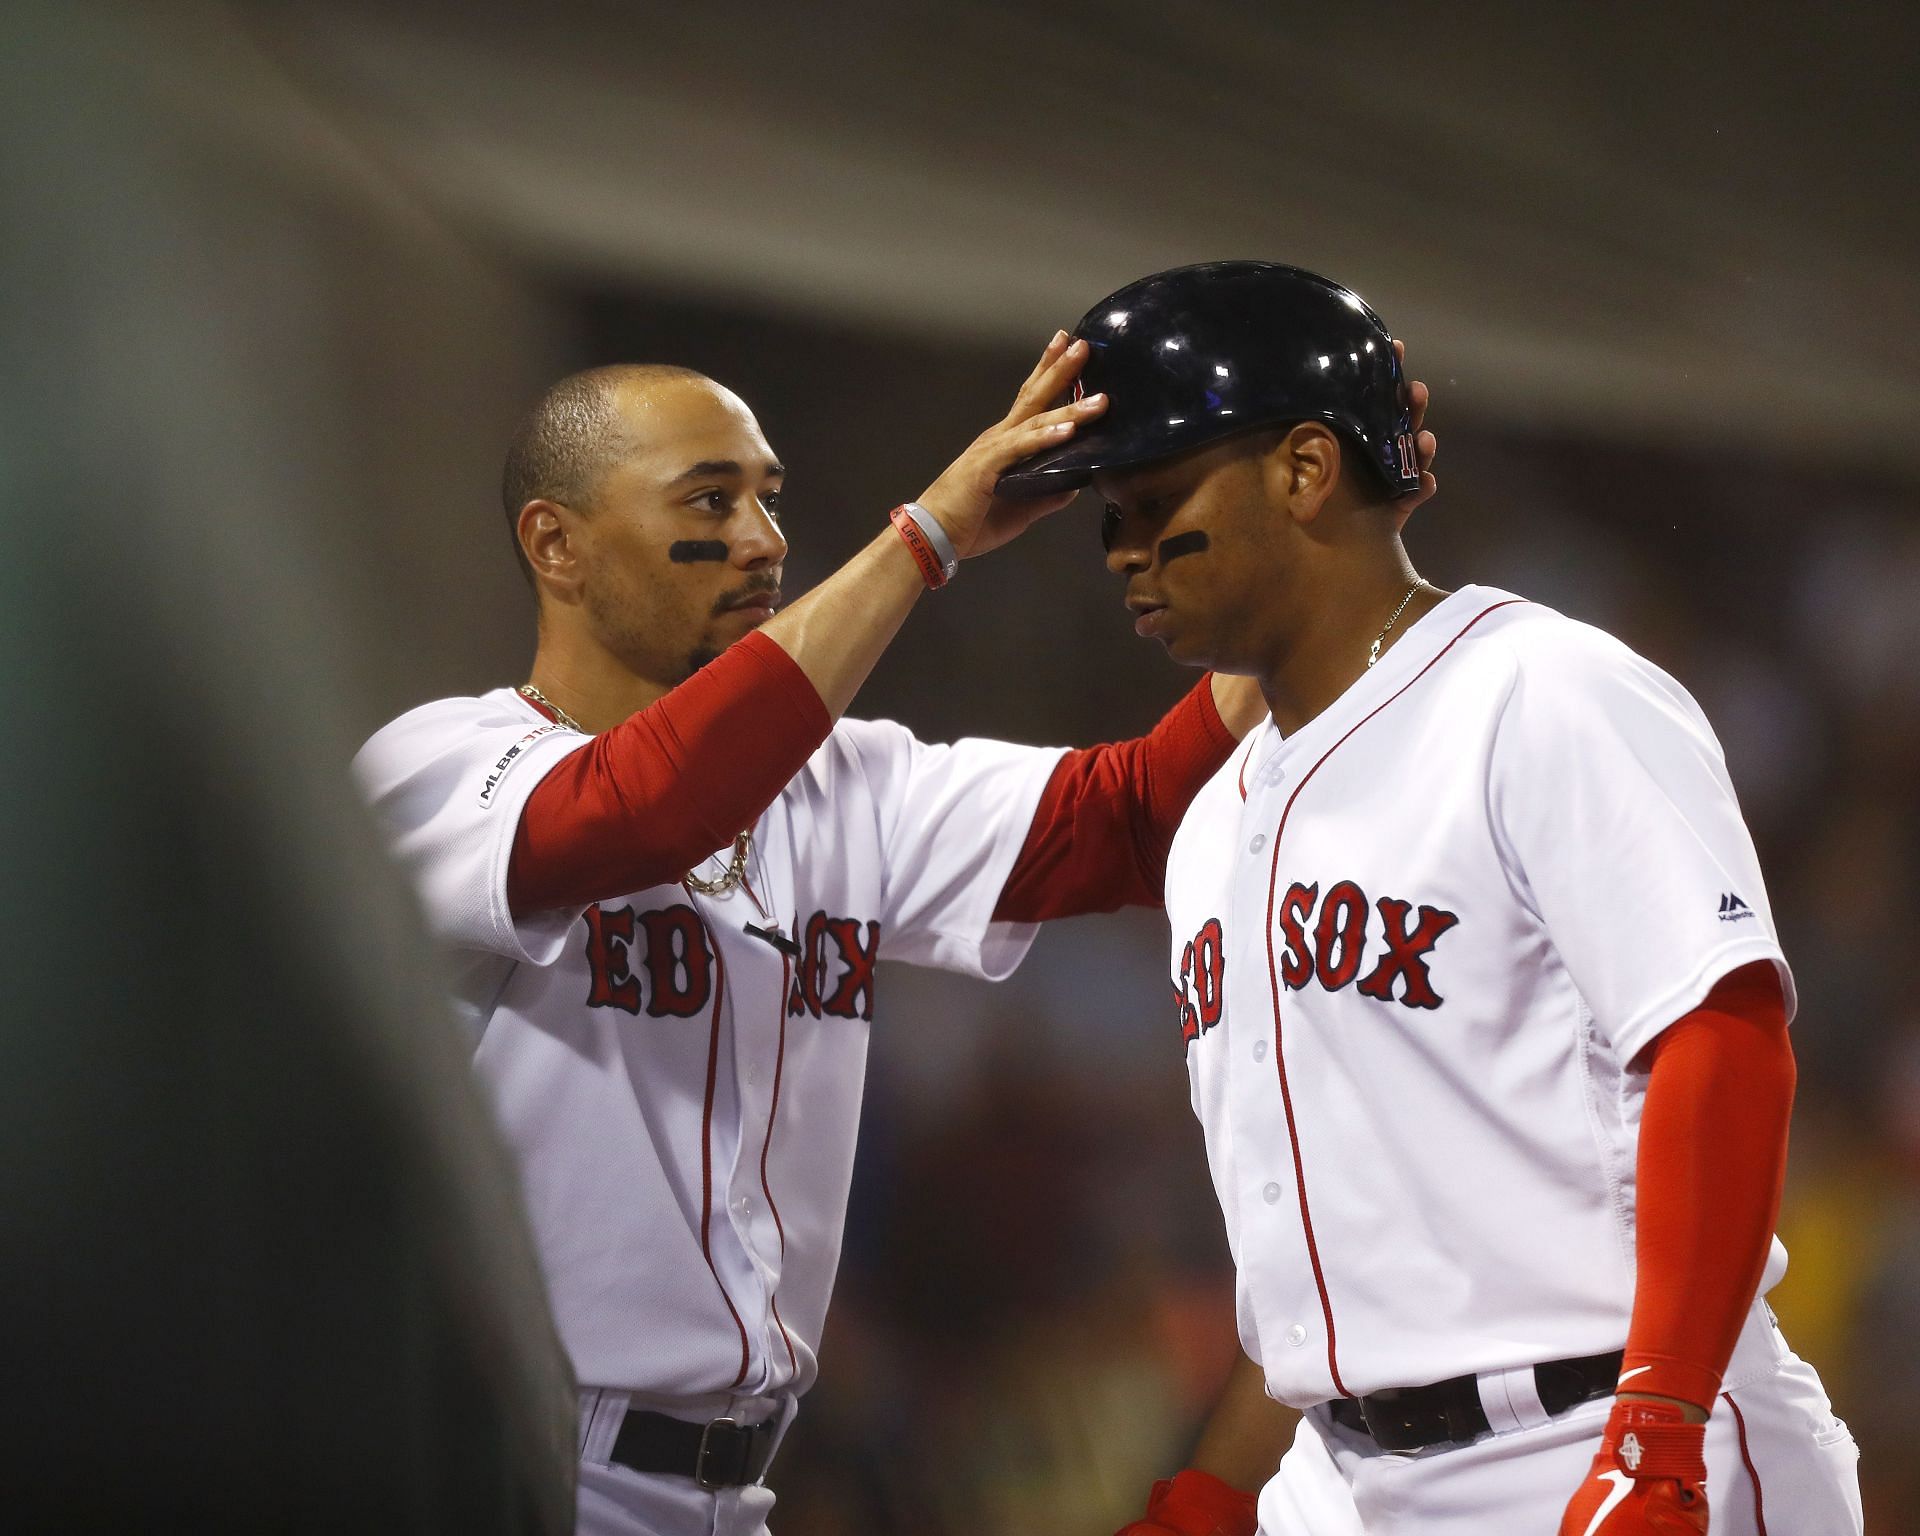 Mookie Betts (left) and Rafael Devers (right) played together on the 2018 Boston Red Sox team that won it all by defeating the Los Angeles Dodgers.